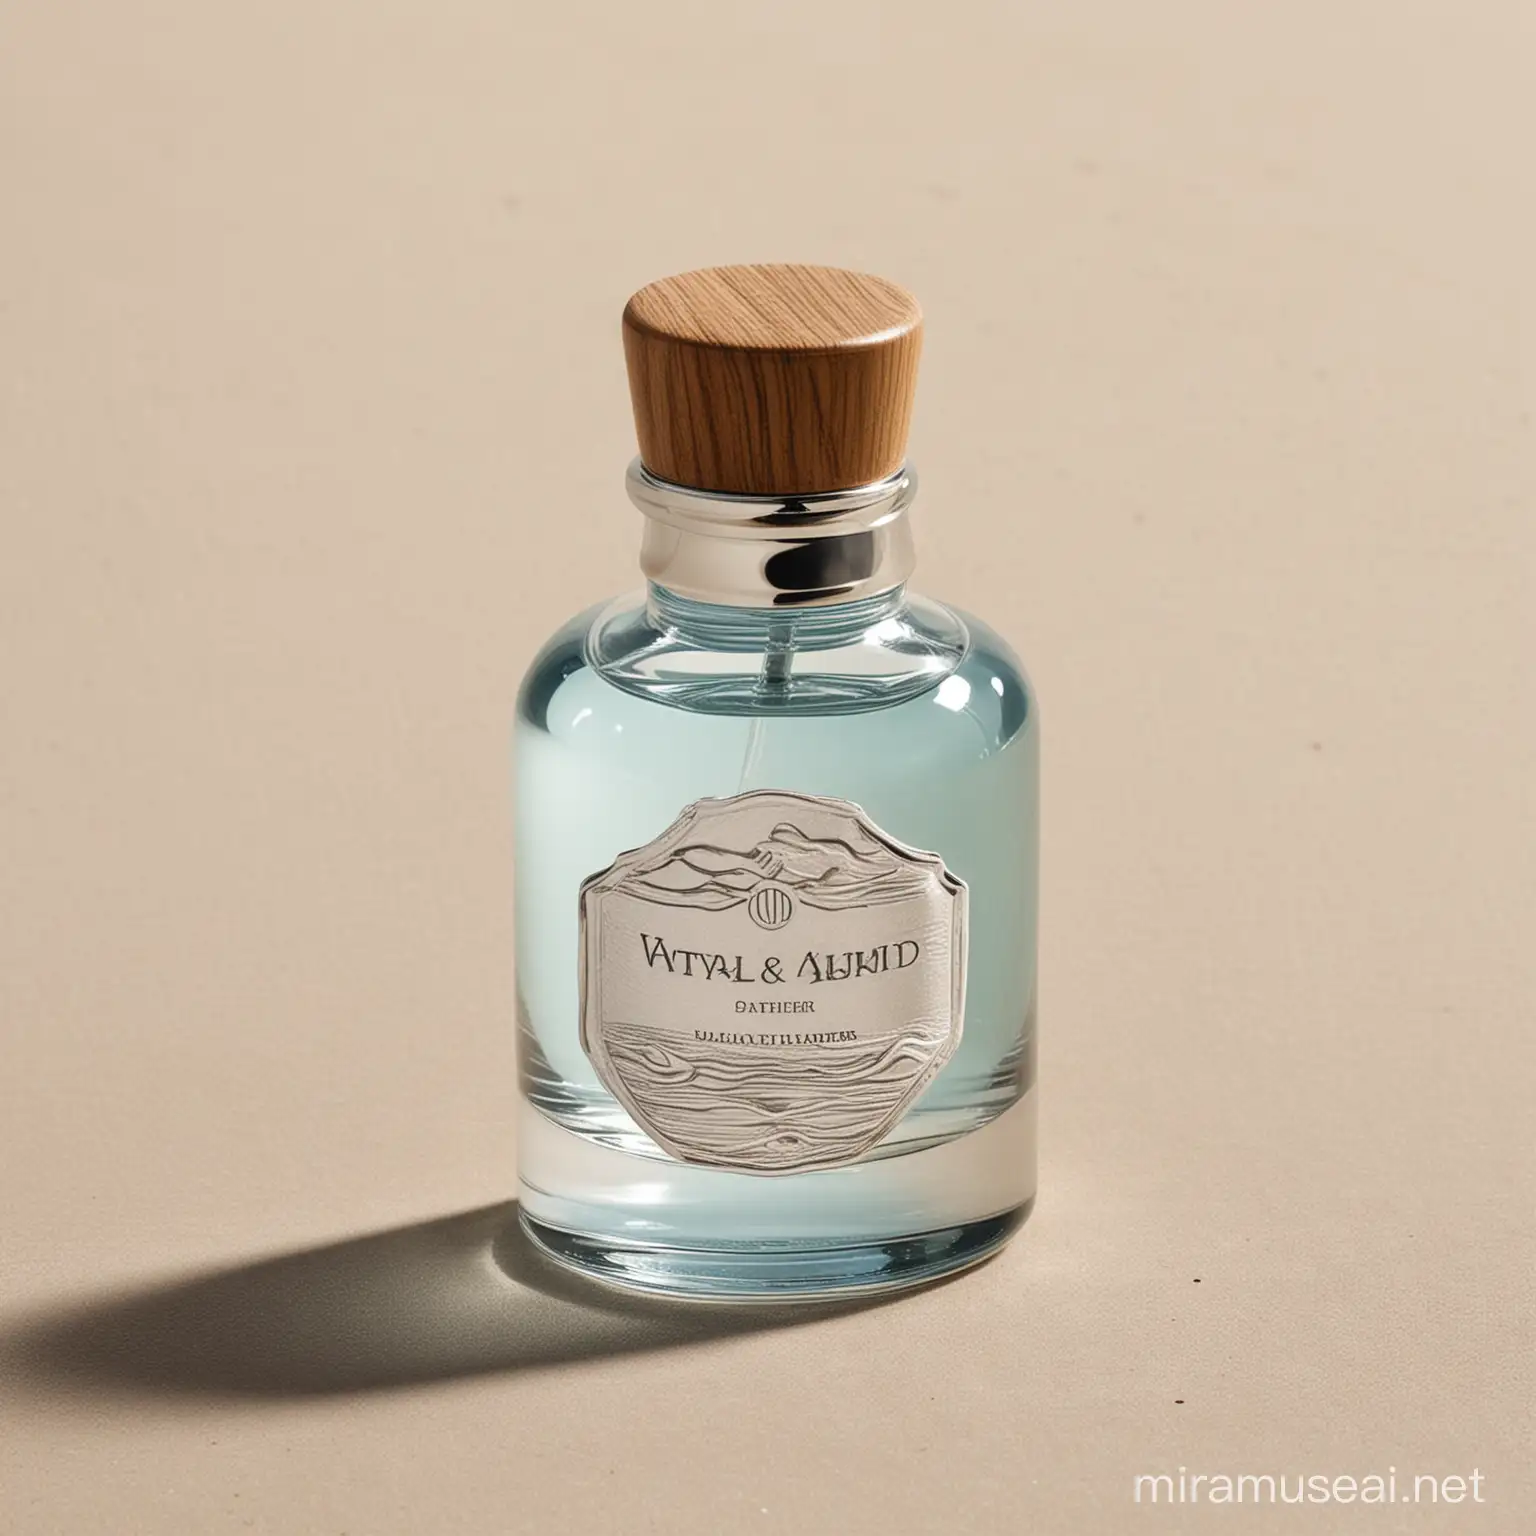 fragrance bottle inspired by the coastal sea, beach inspired and boat inspired design elements in the cap and glass, neutral warm colors with accepts of silver and wood